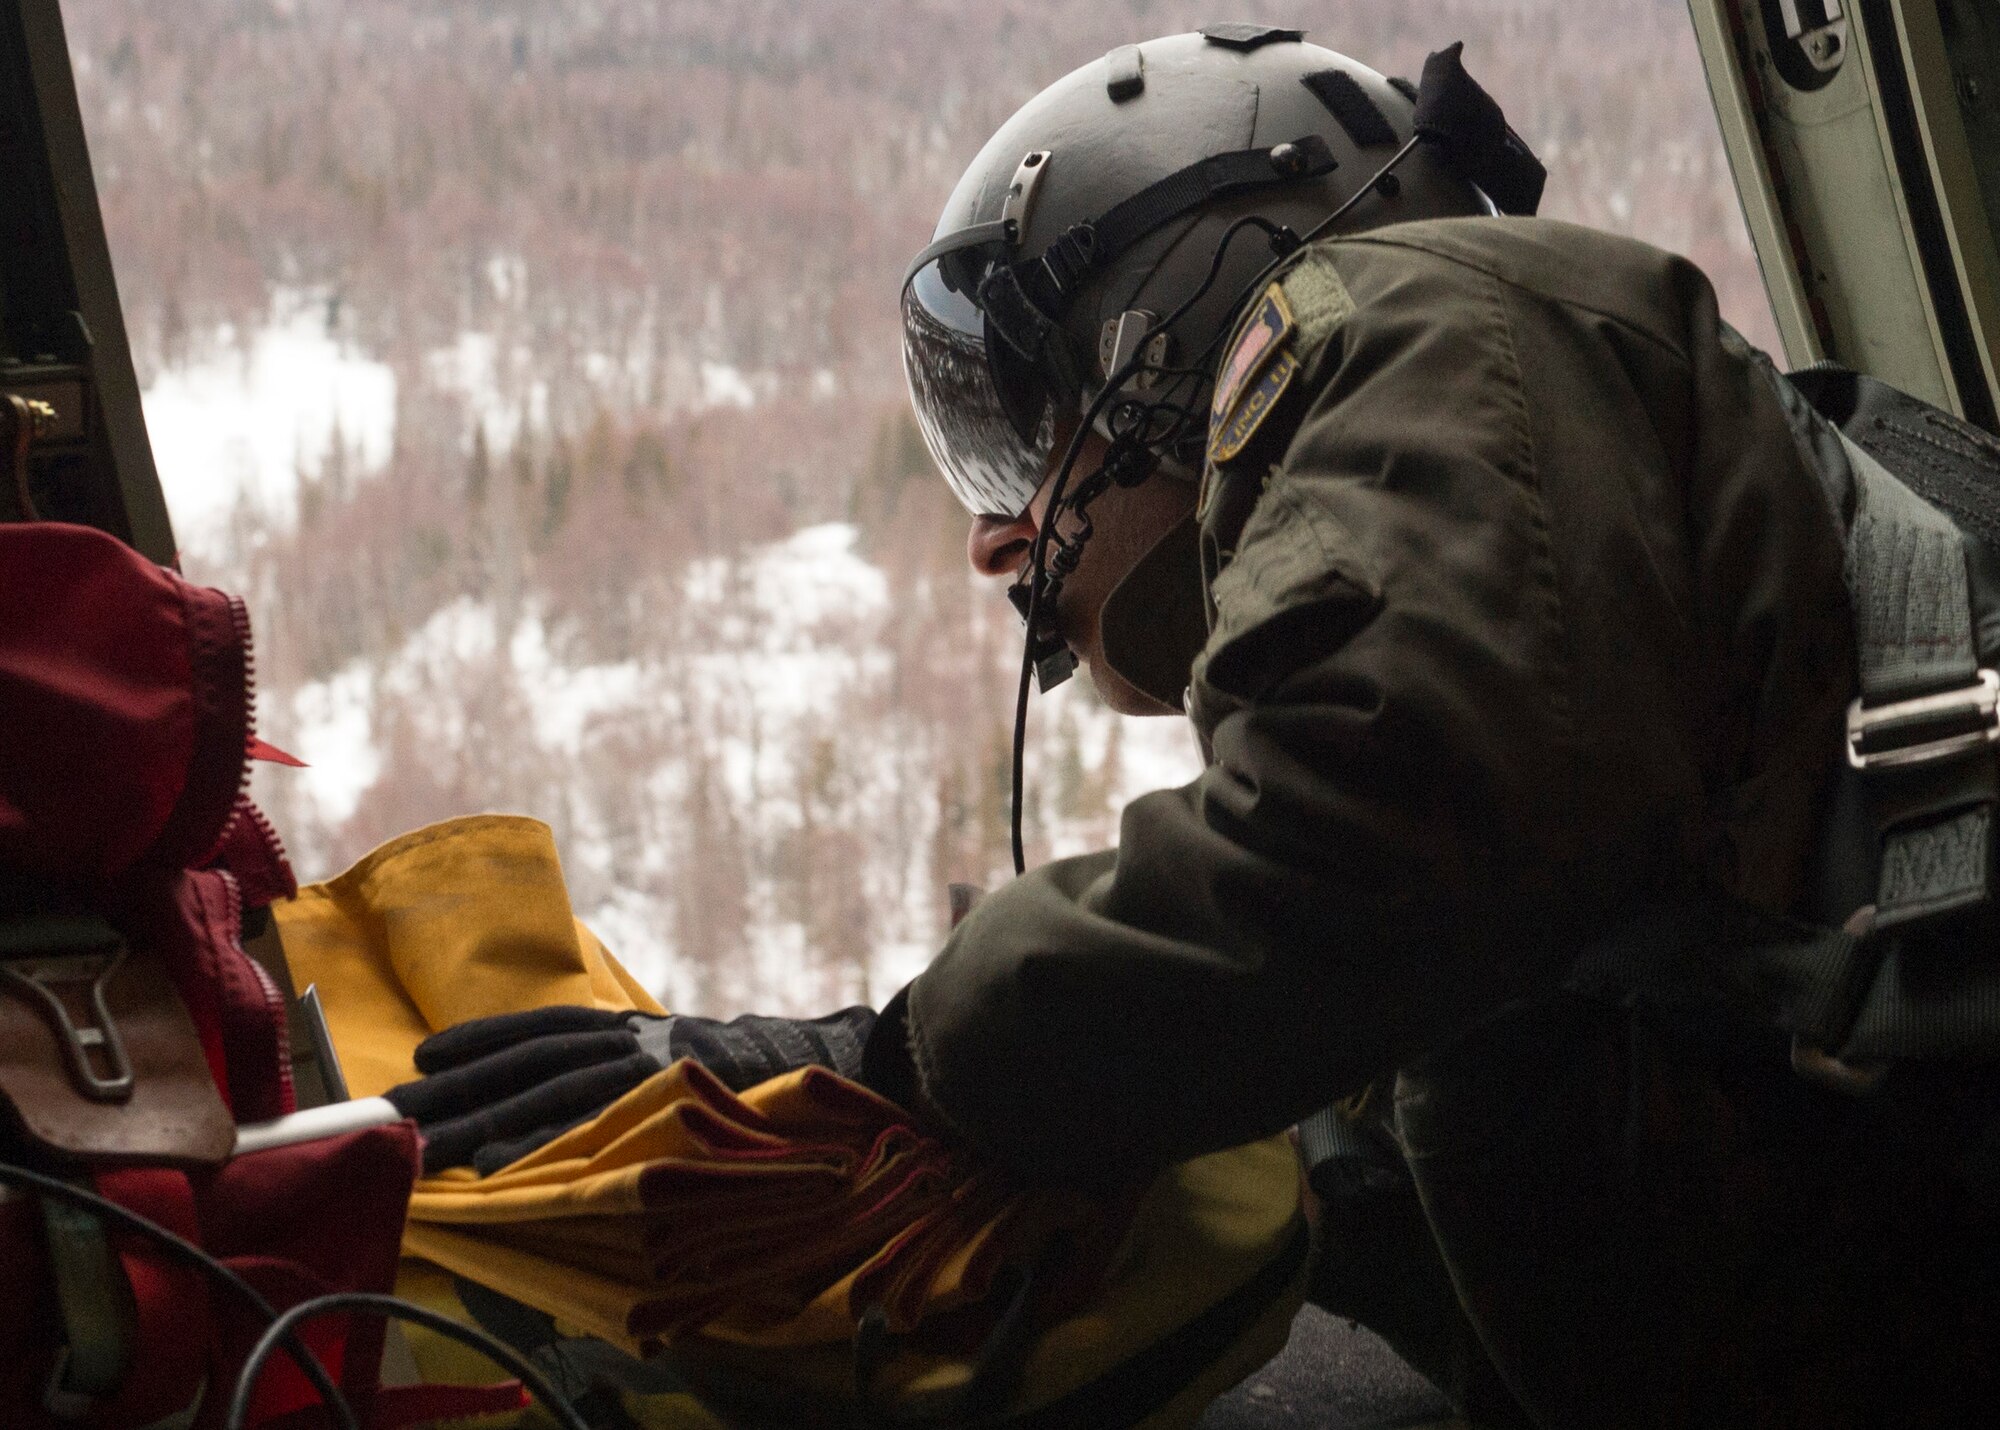 U.S. Air Force Senior Airman Marcus Moloney, a loadmaster assigned to the 211th Rescue Squadron, Alaska Air National Guard, drops a freefall bundle of supplies to a simulated victim during a search and rescue exercise over Alaska, Jan. 21, 2021, as part of Operation Noble Defender. Operation Noble Defender is a North American Air Defense Command air-defense operation which allows dynamic training for operational readiness in an arctic environment.